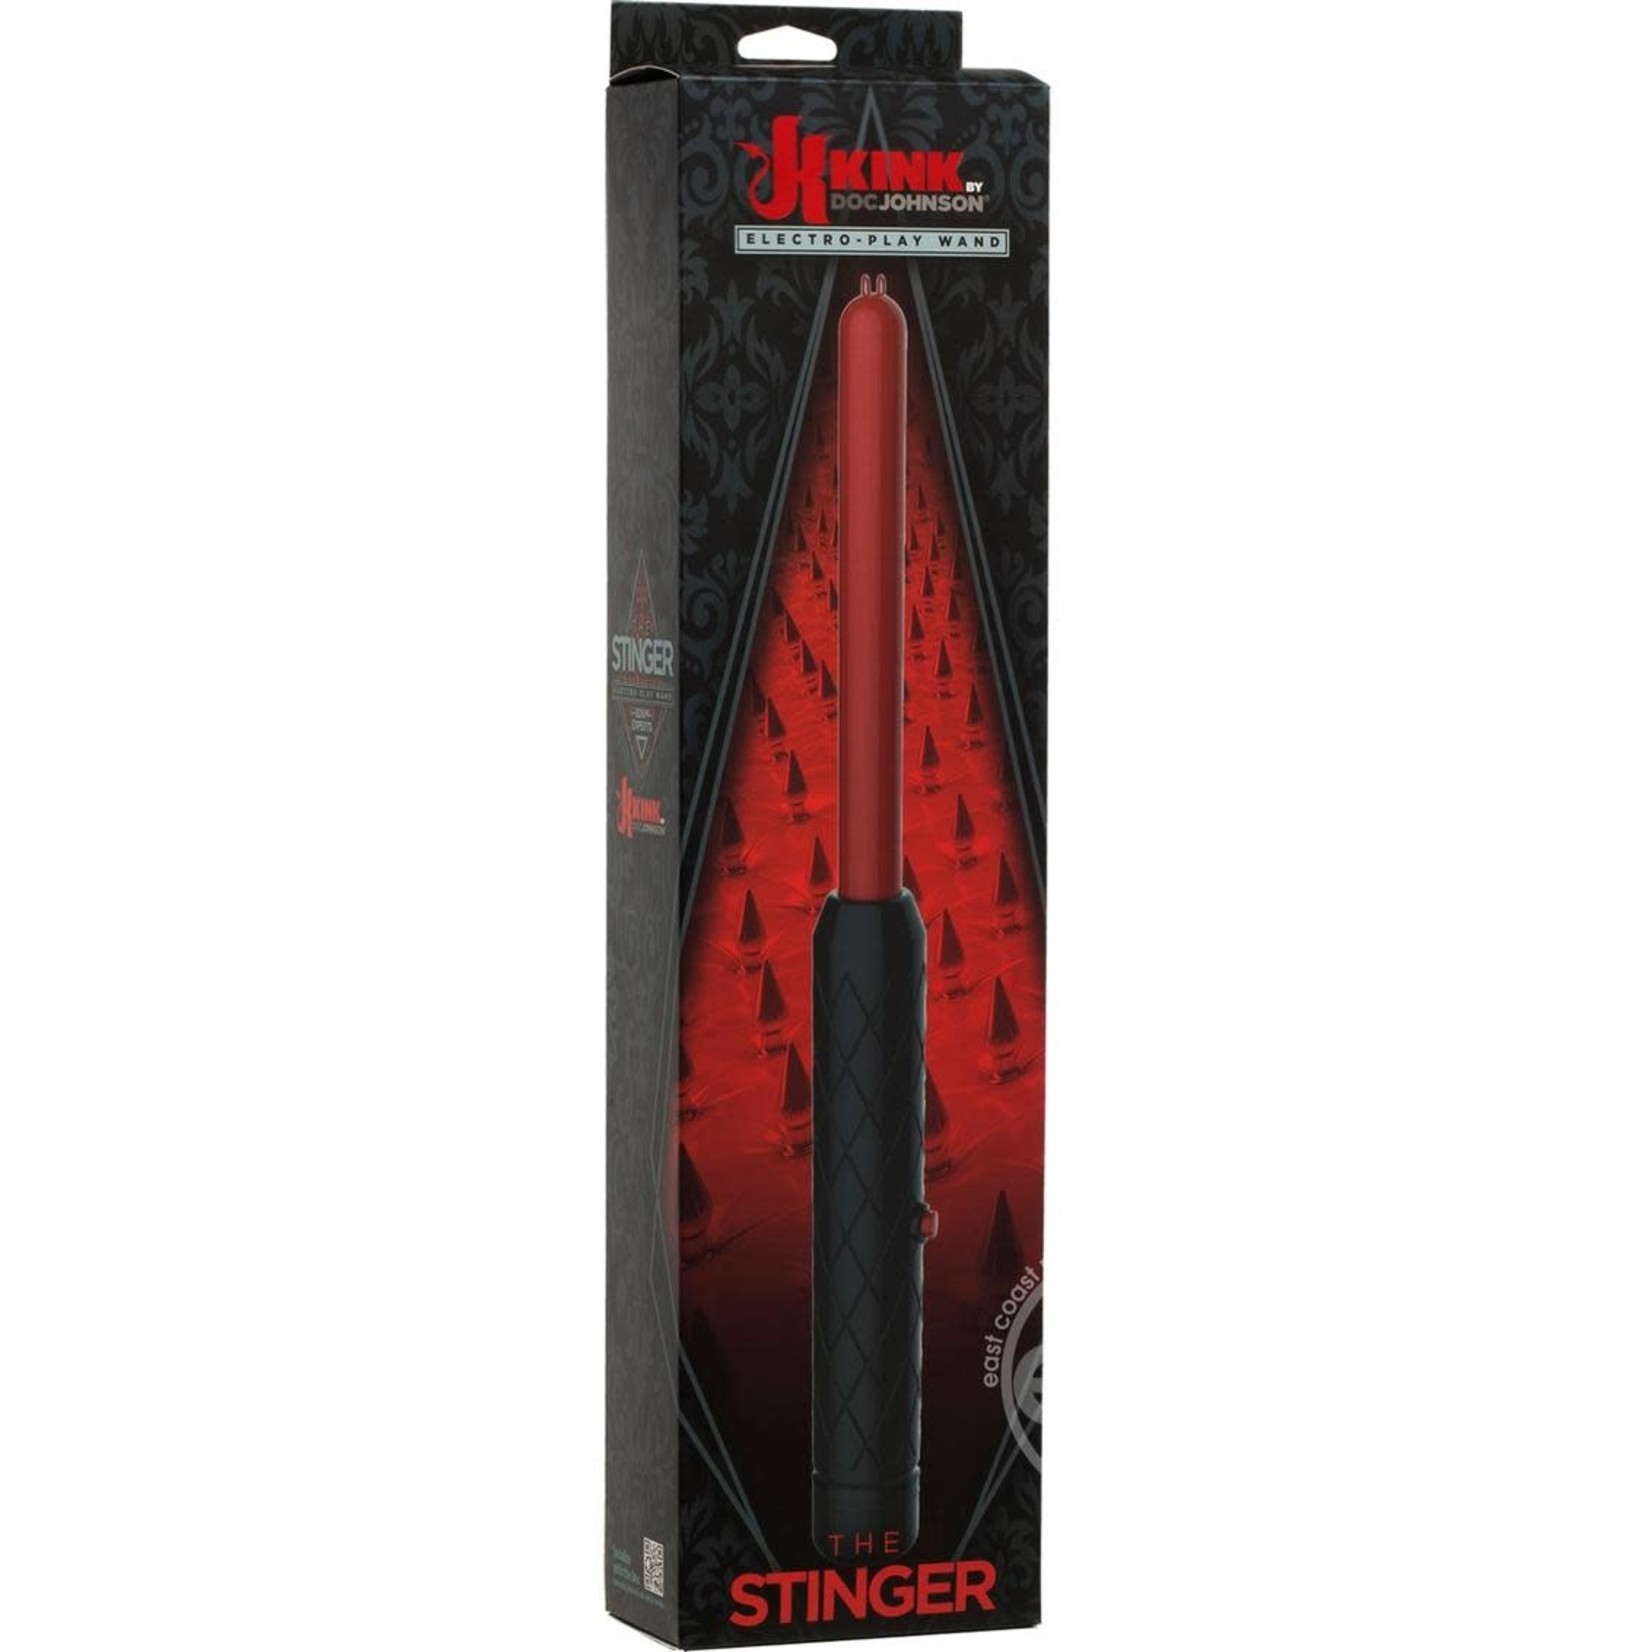 Kink The Stinger Electroplay Wand - Black/Red